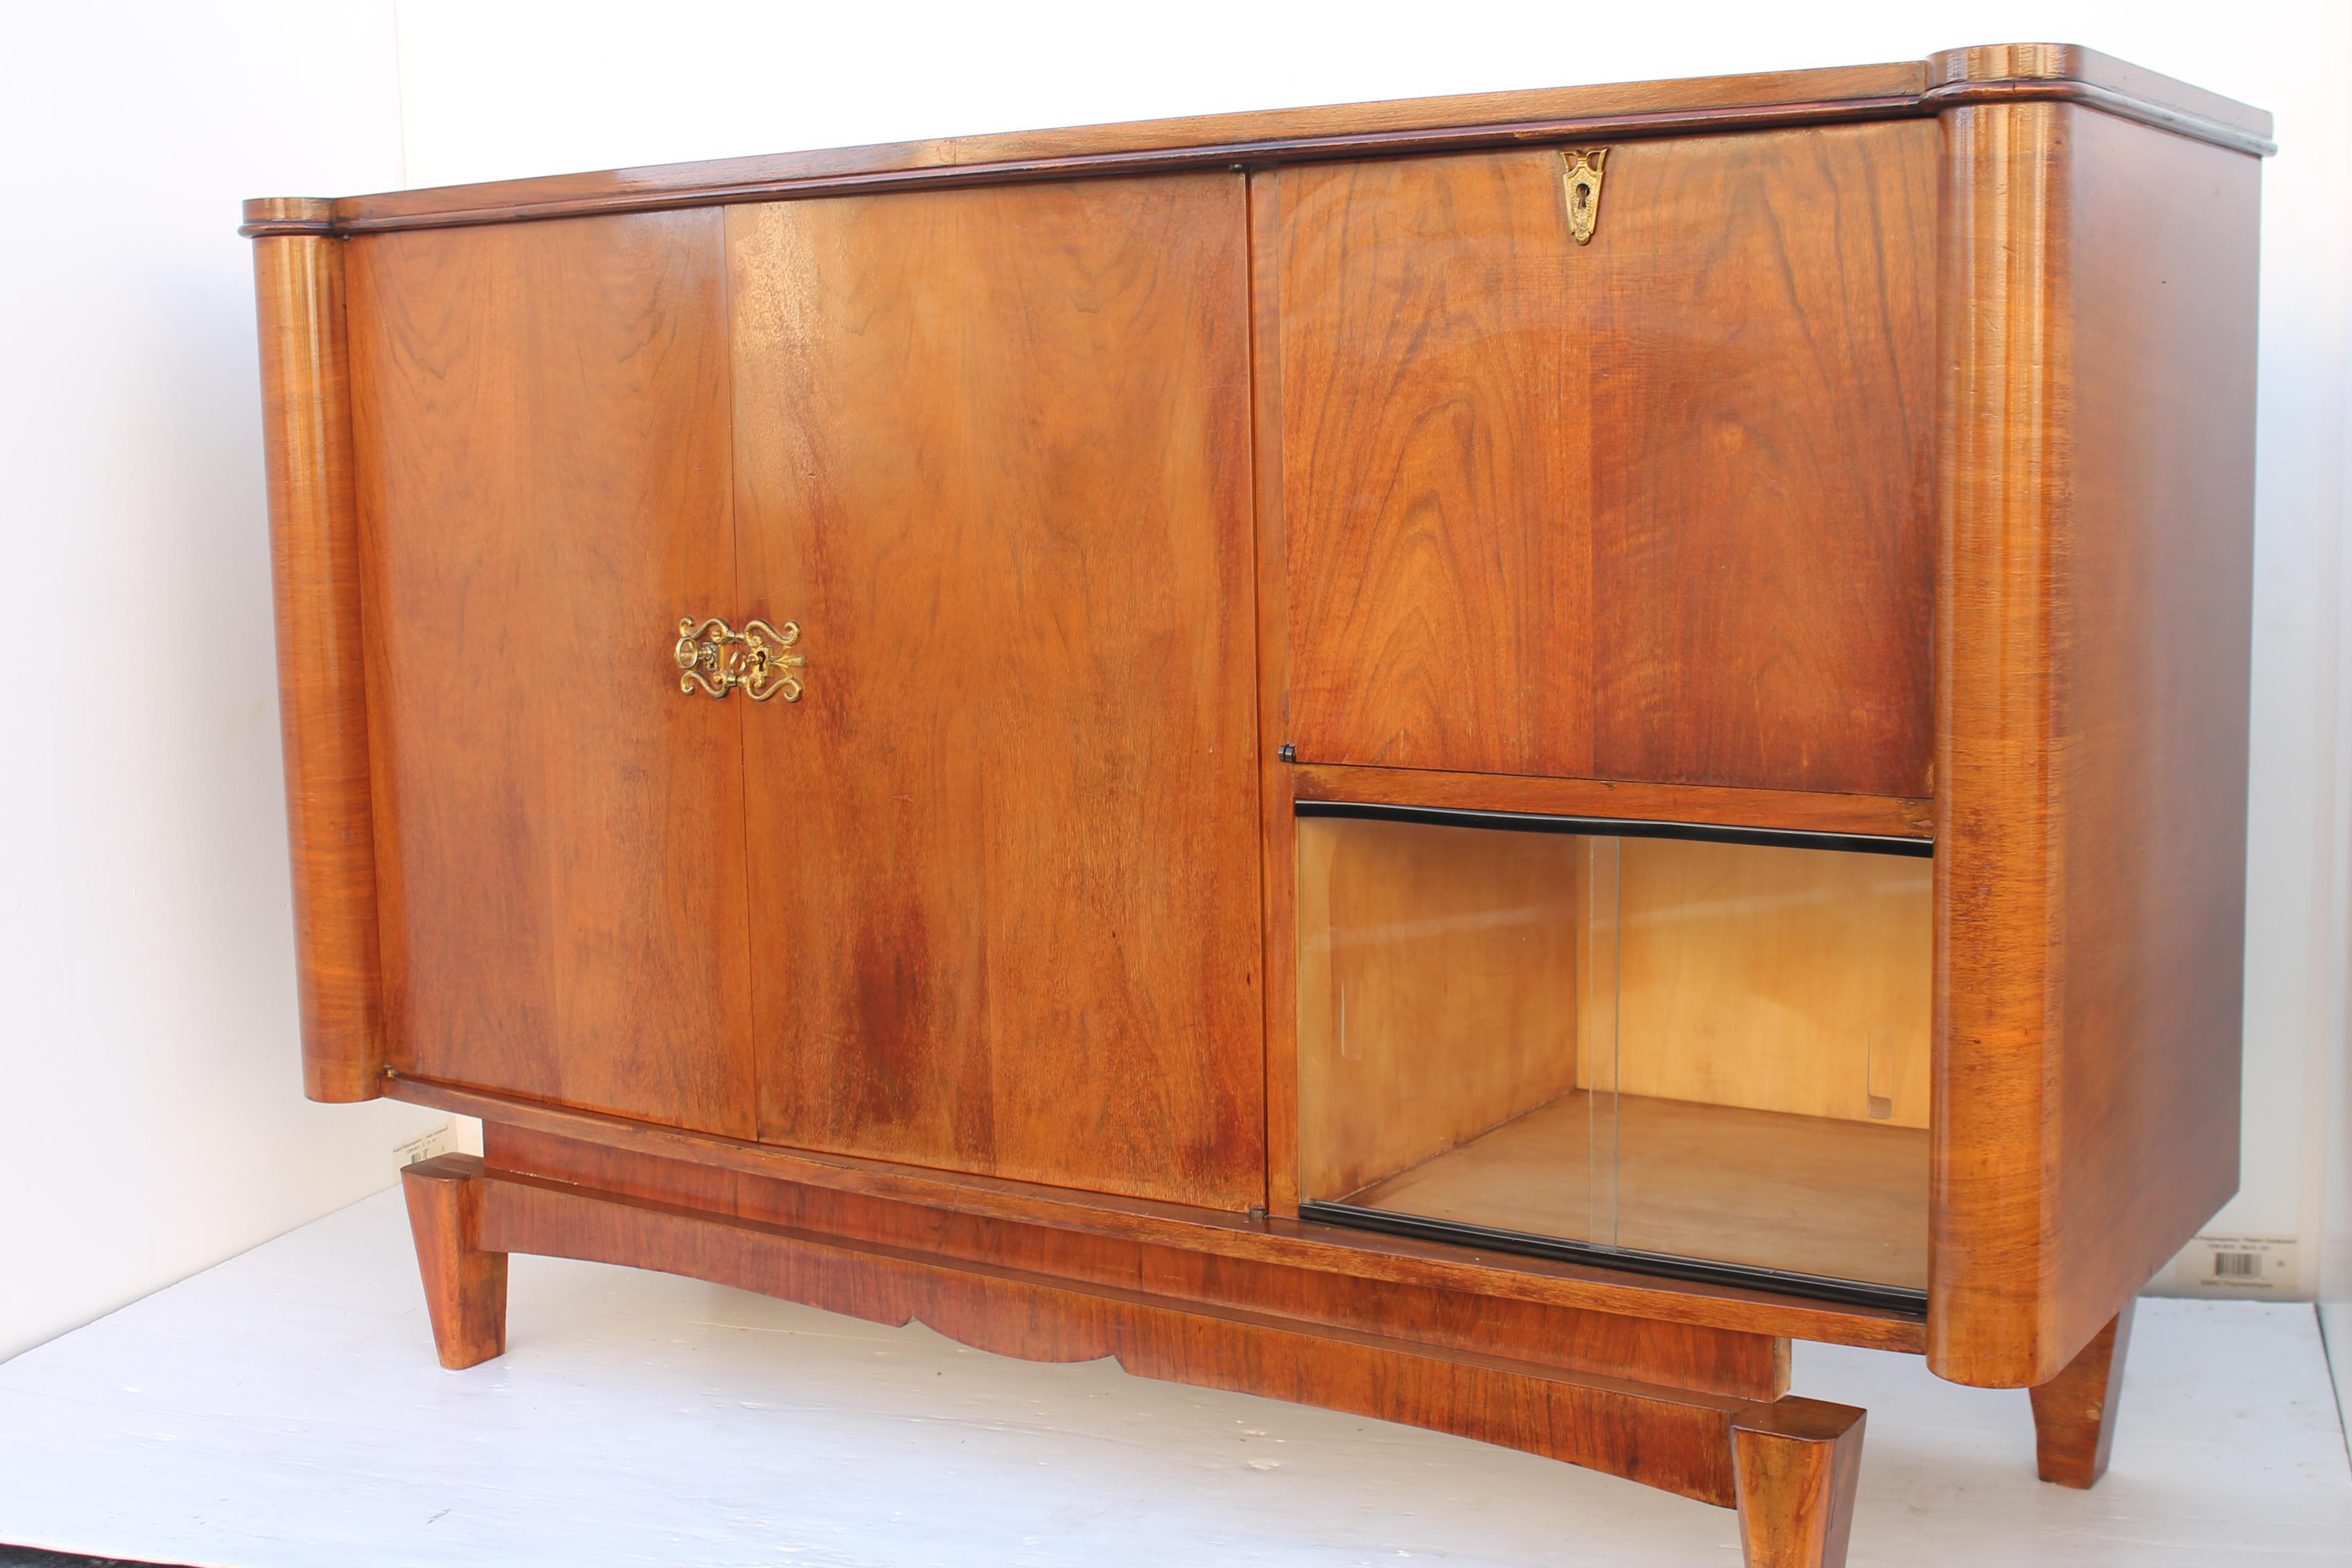 Wood 1960's French Modern - Blonde Toned Buffet/ Sideboard/ Credenza/ Dry Bar For Sale